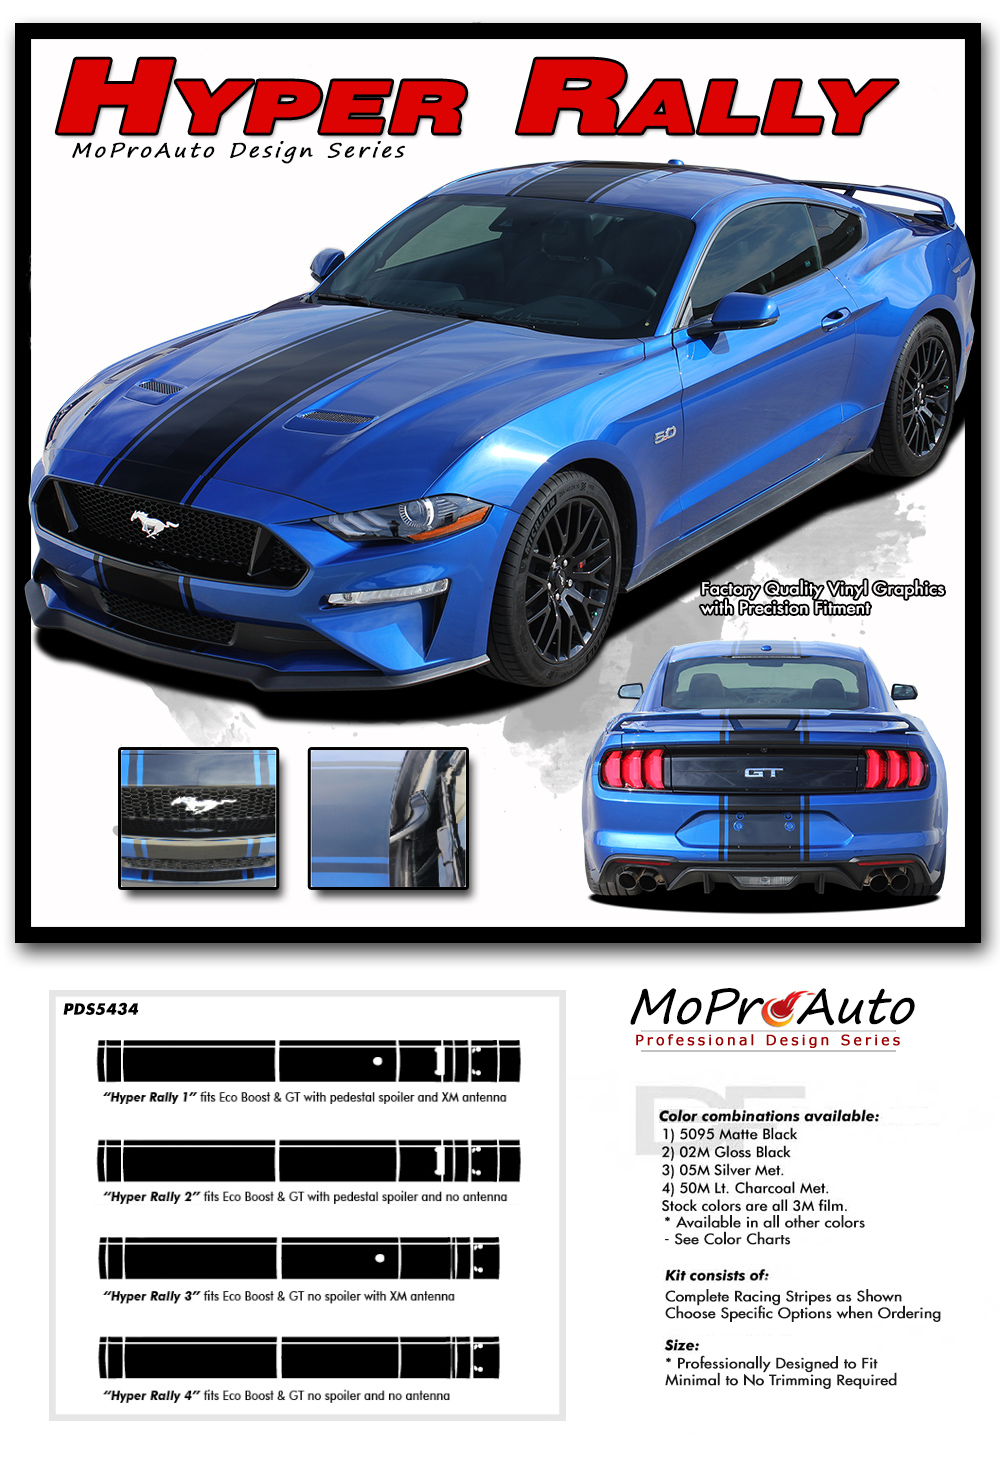 2018 2019 2020 2021 2022 HYPER RALLY OEM Style Racing Stripes for Ford Mustang - MoProAuto Pro Design Series Vinyl Graphics, Stripes and Decals Kit